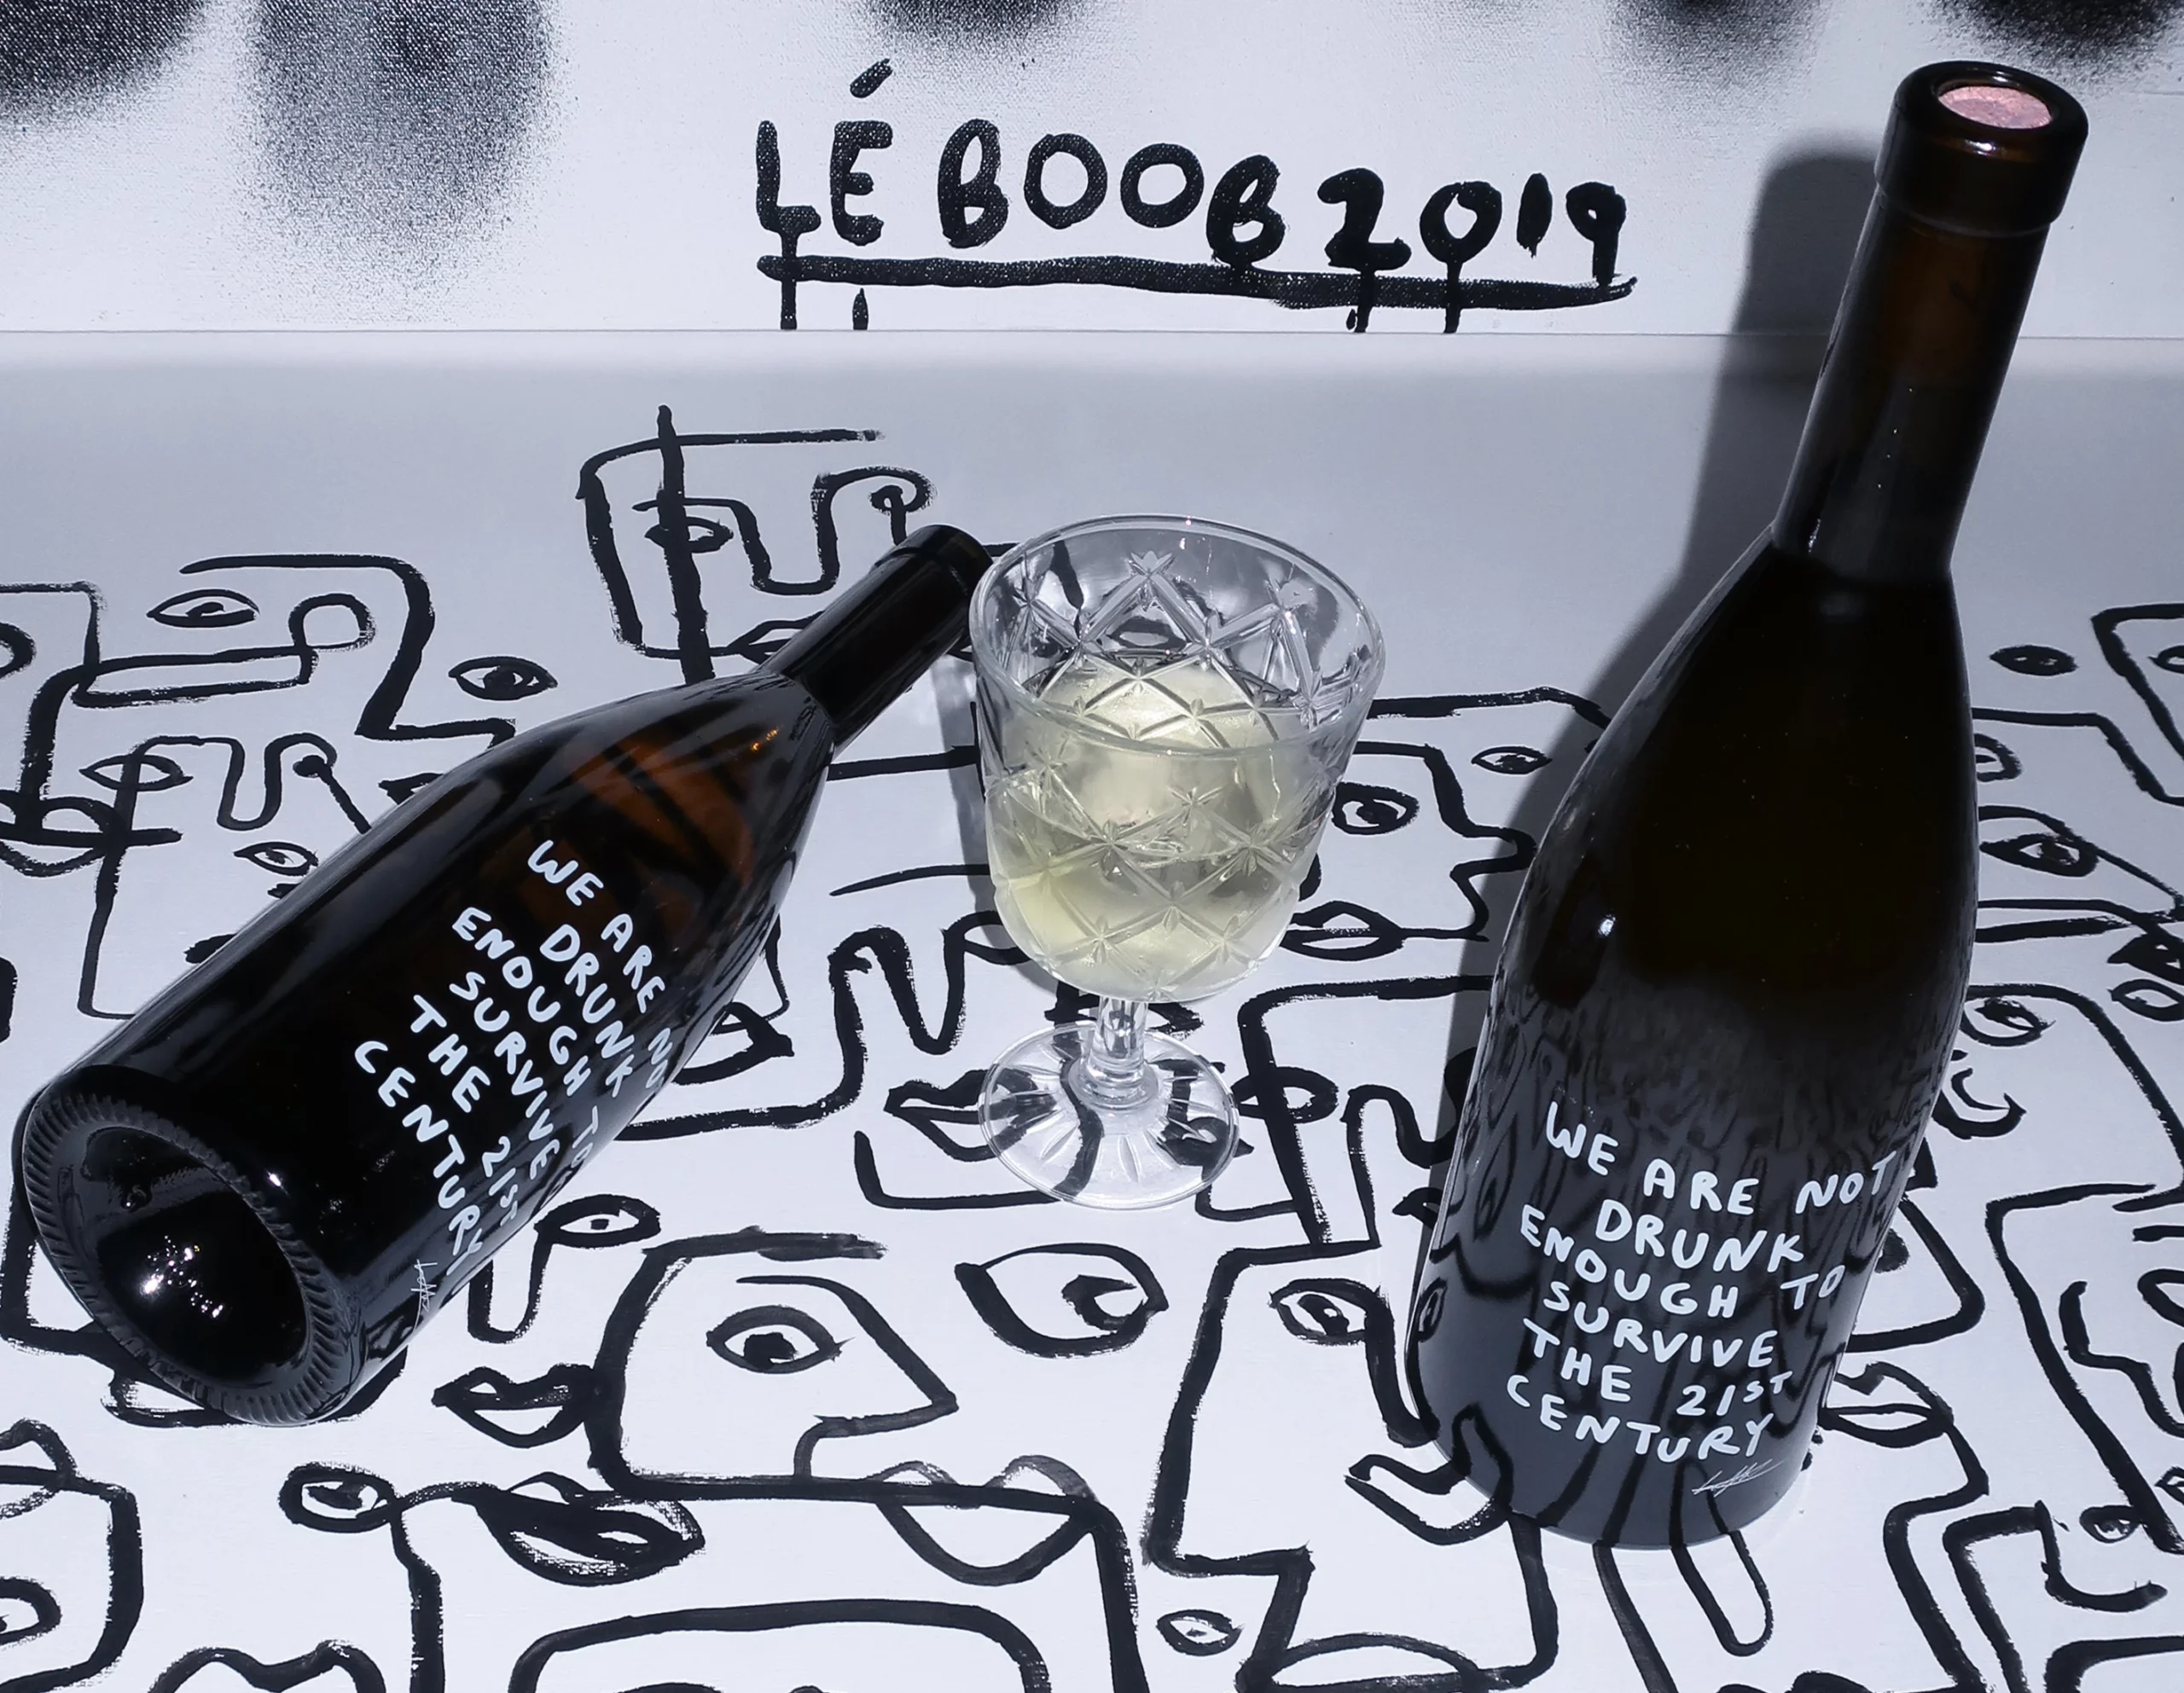 the message on the limited edition “Untitled”s wine sends a playful a category-disrupting message 